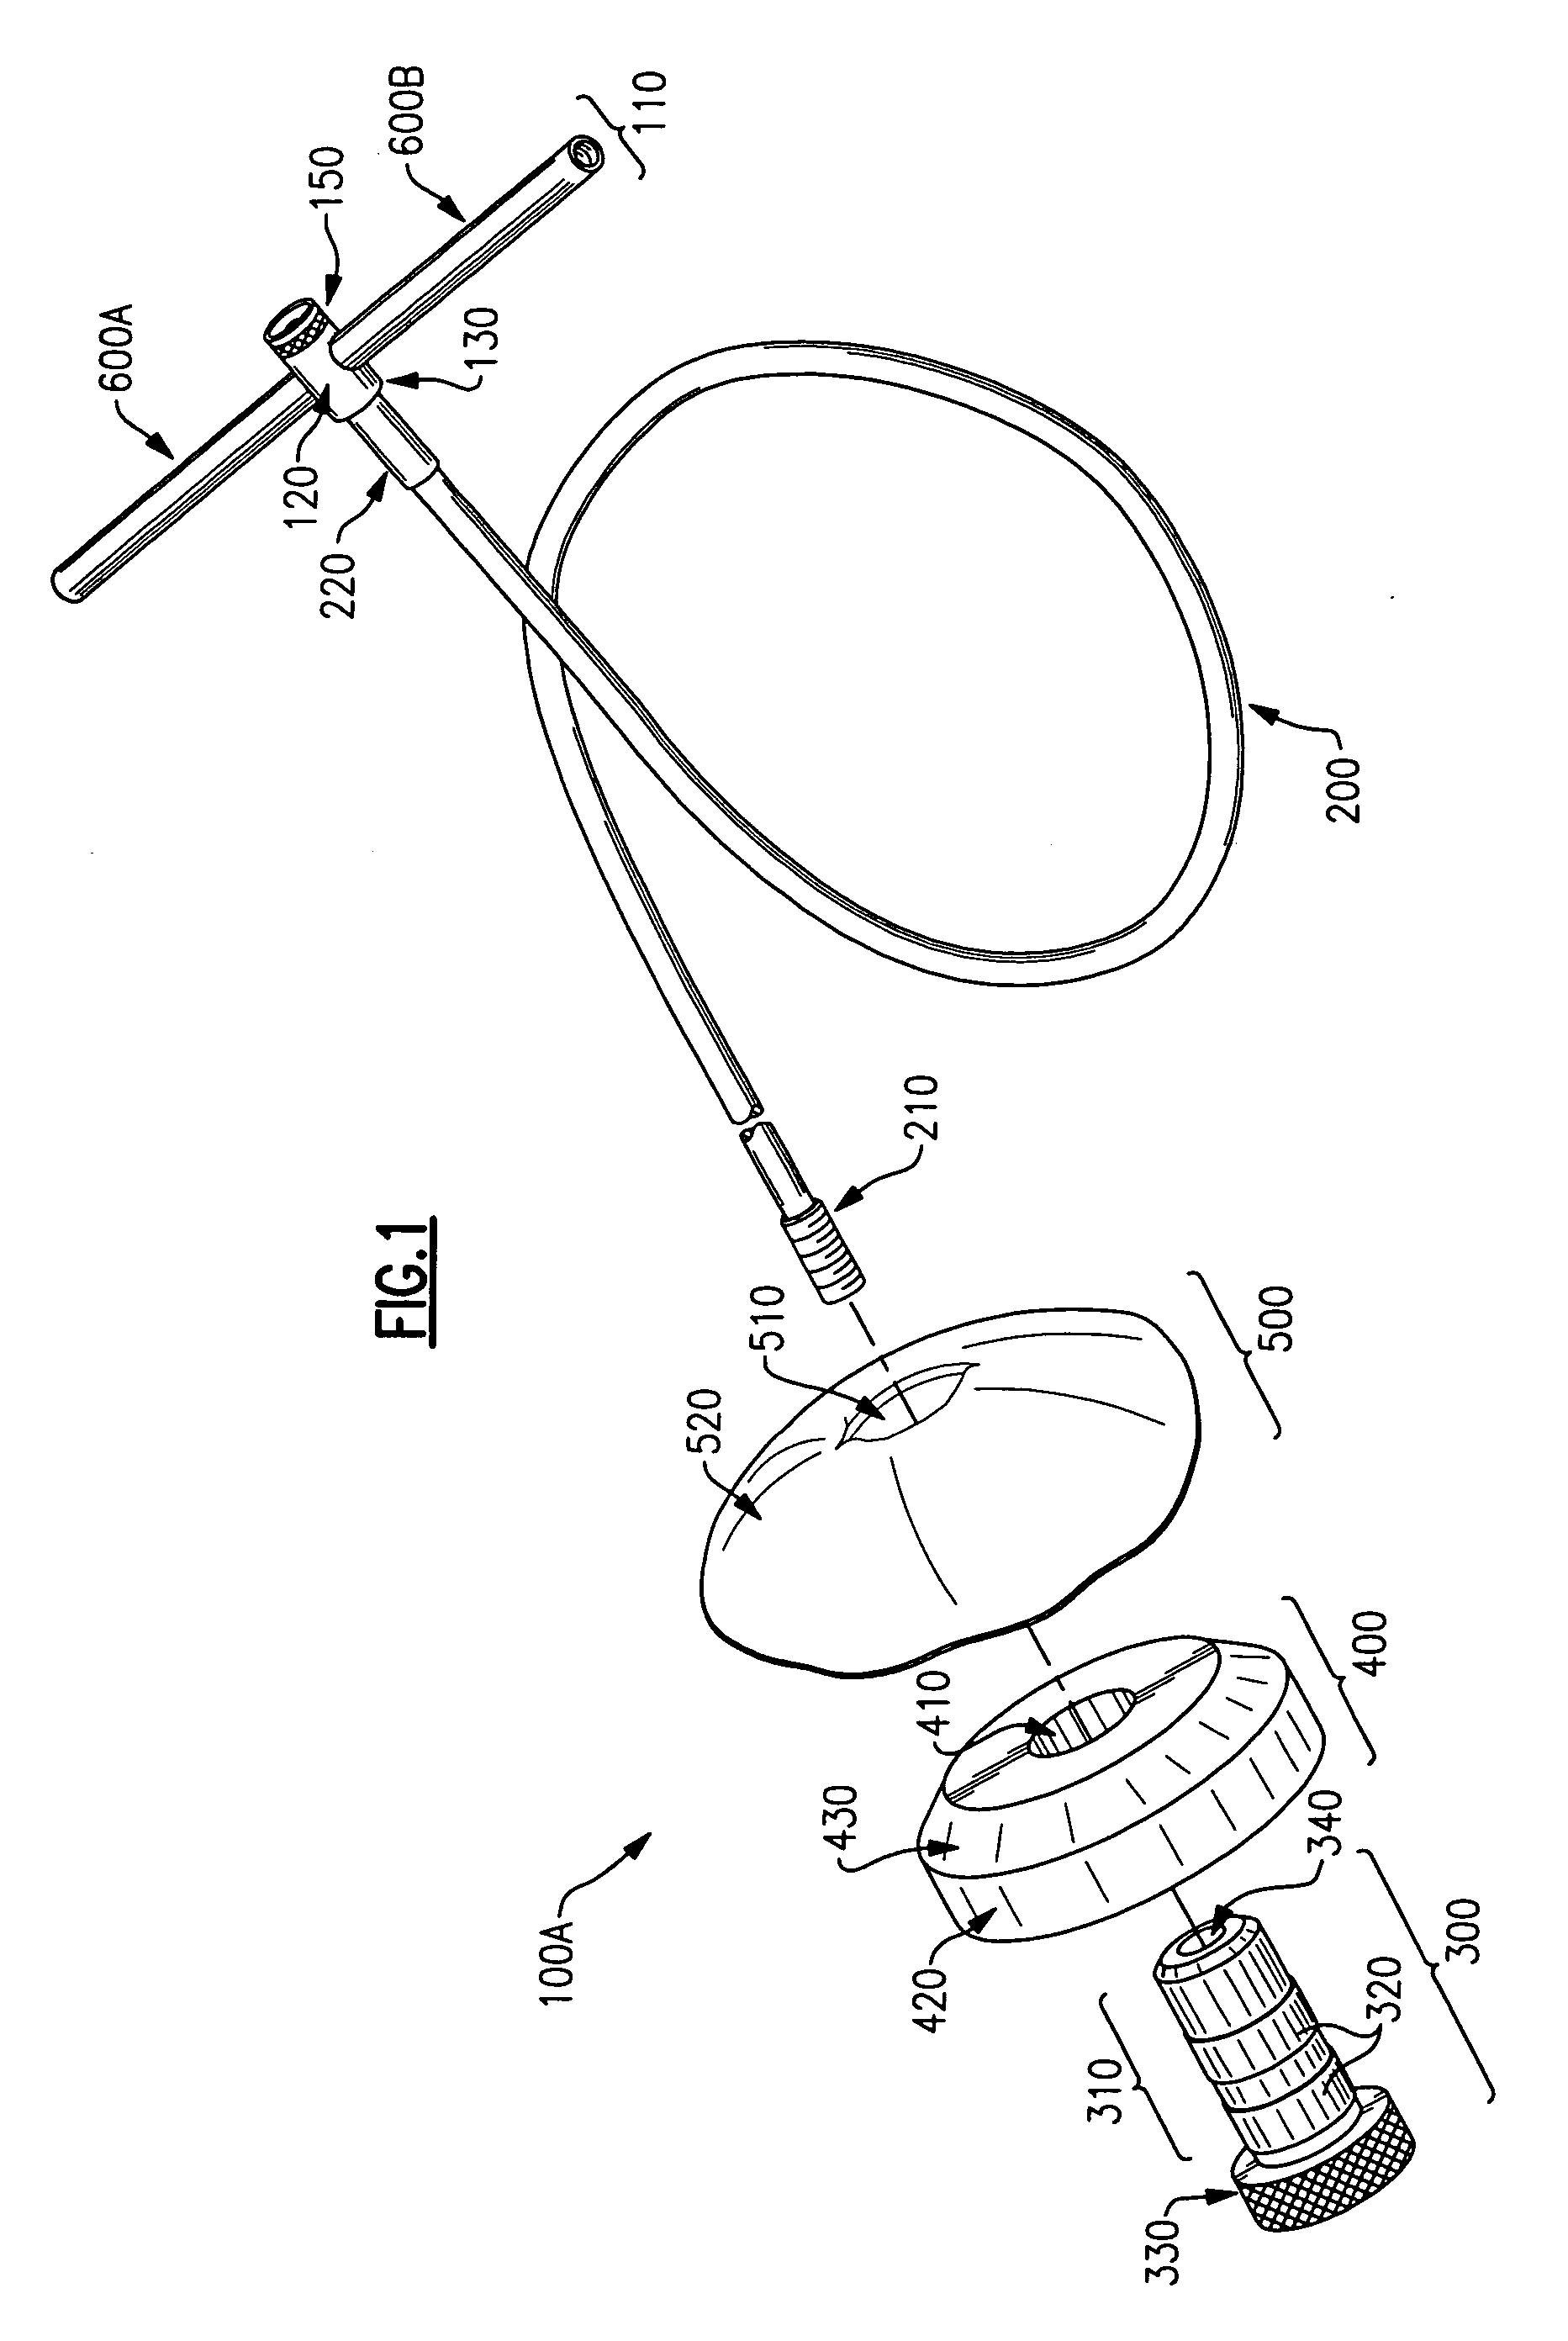 Configurable device for cleaning the barrel of a firearm, and firearm cleaning kit containing components of device